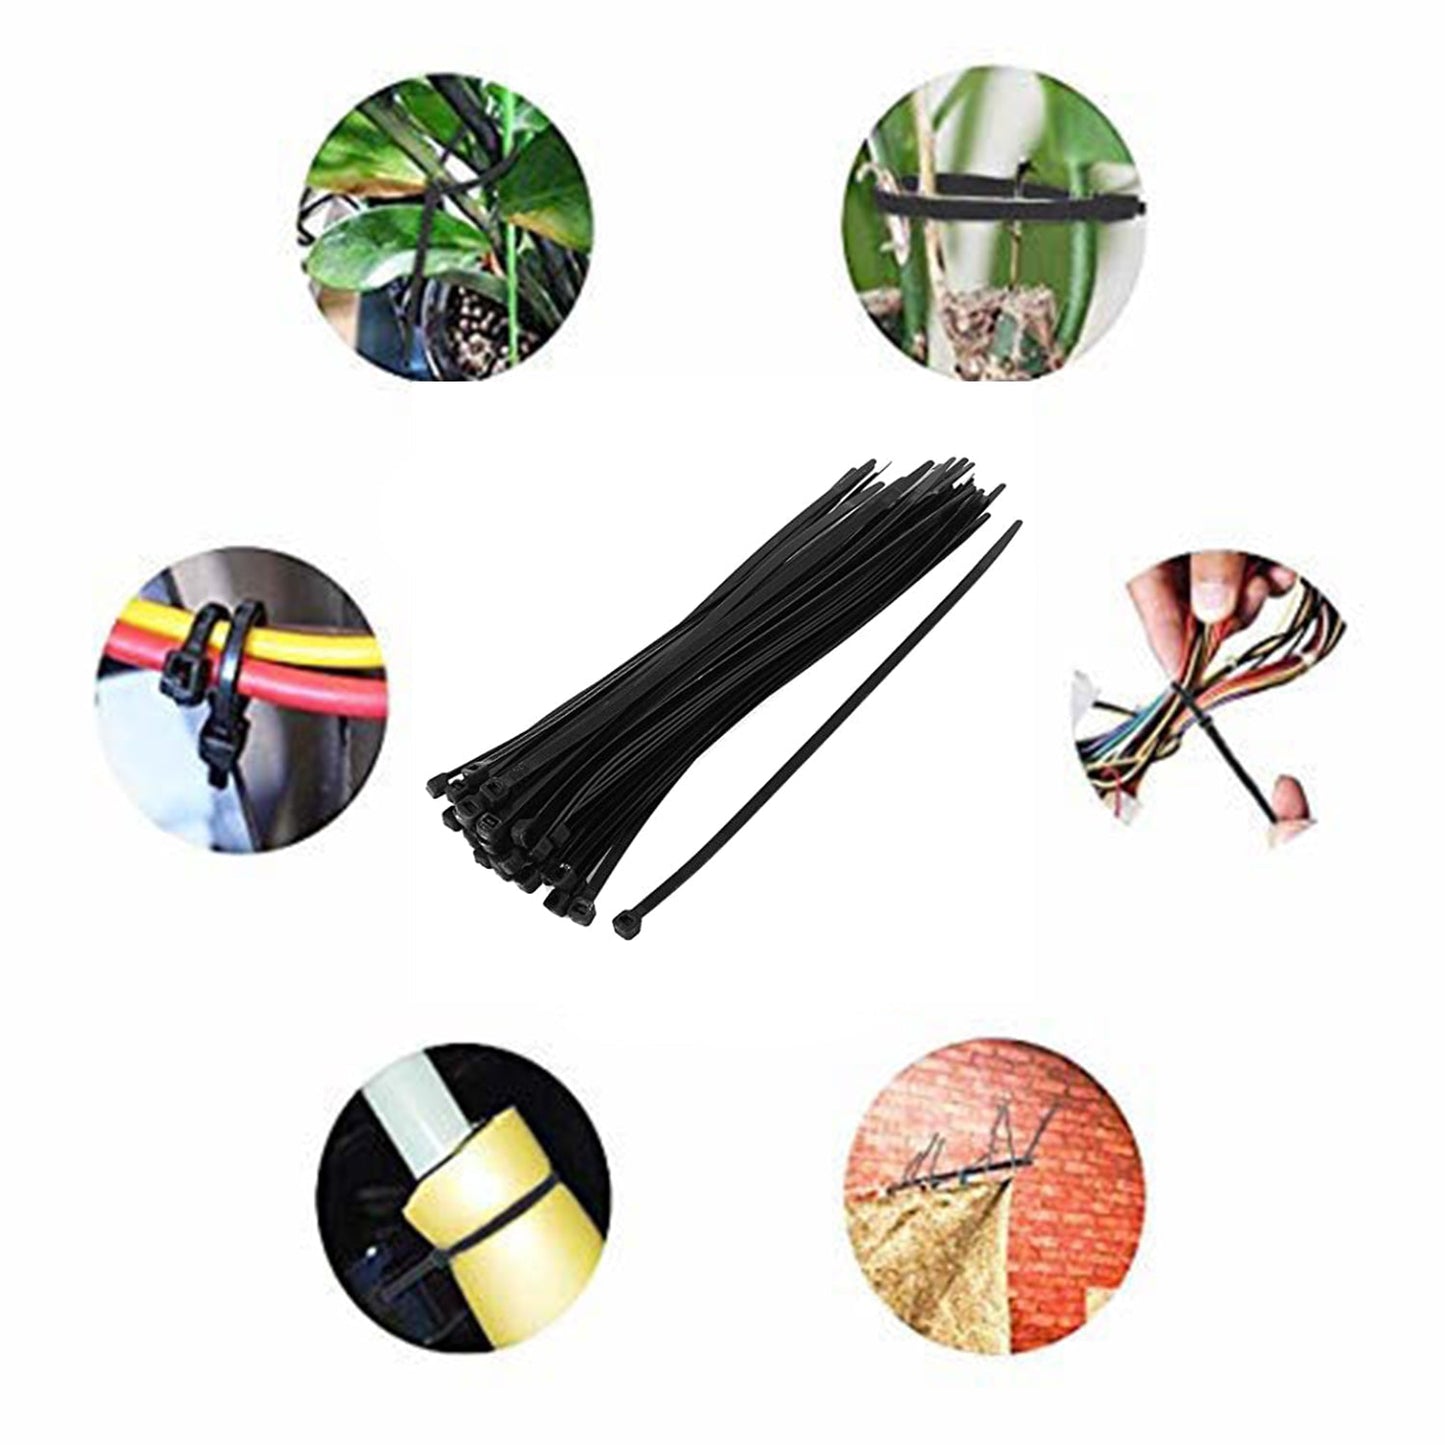 3138 4Inch Nylon Self Locking Cable Ties, Heavy Duty Strong Zip Wire Tie. Pack of 100pc - Black Amd-Deodap